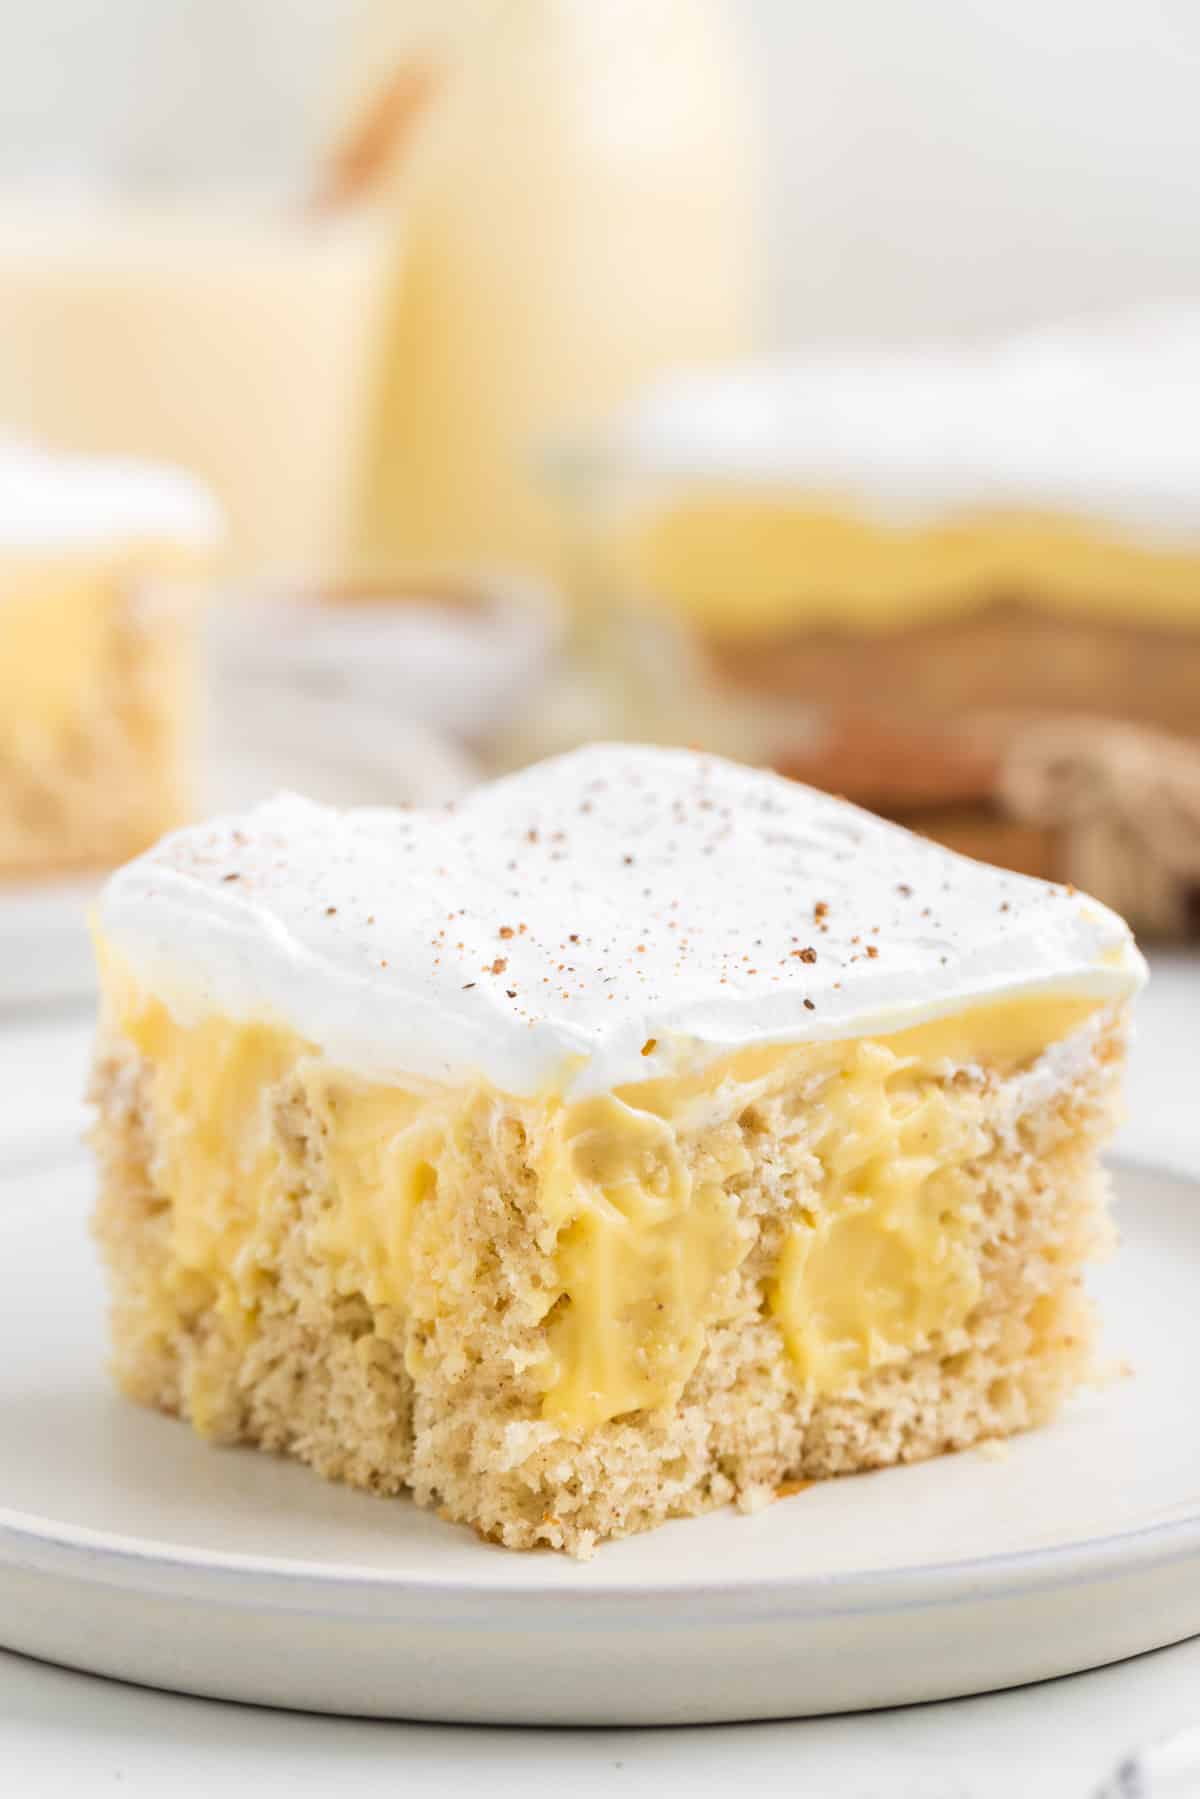 Eggnog poke cake with layers of eggnog pudding sliced and served on a white plate.